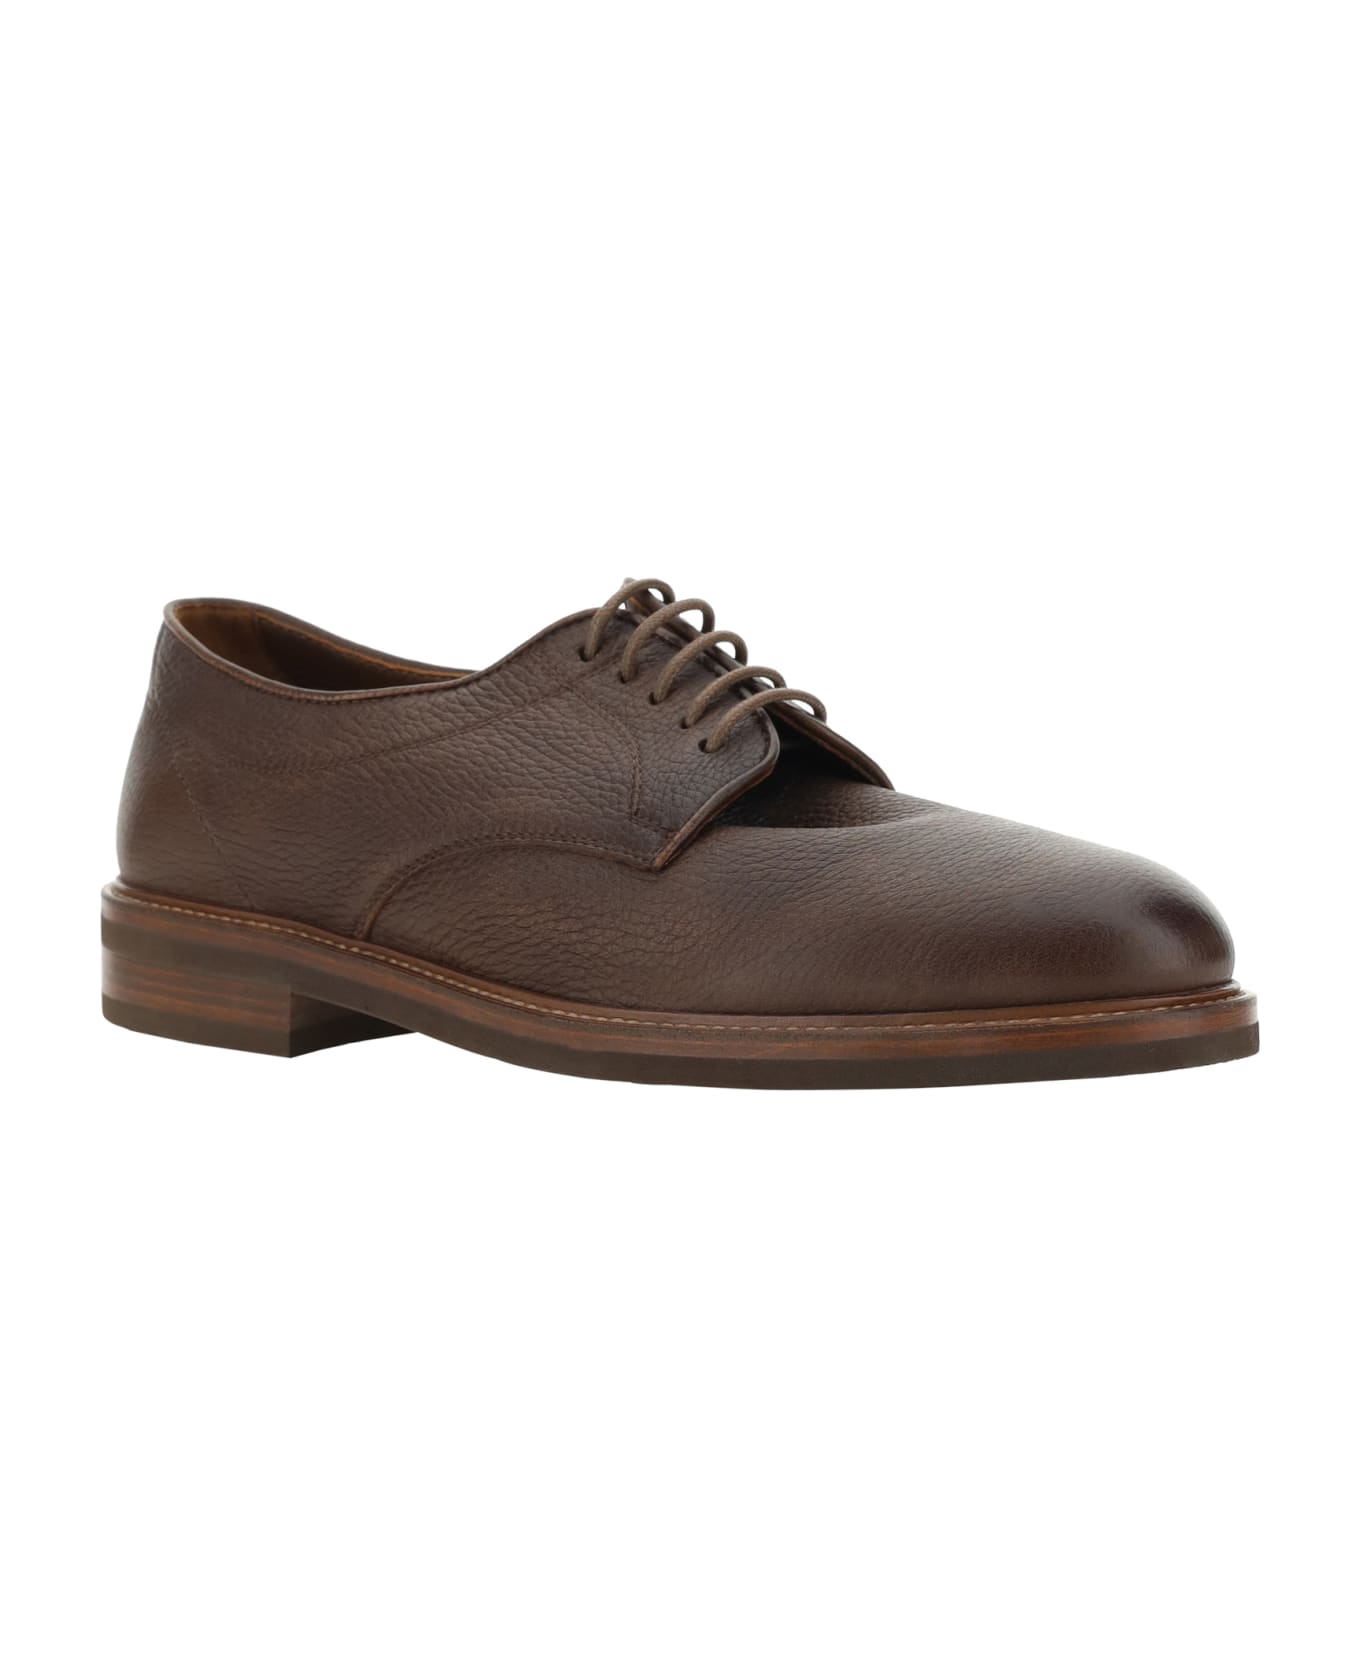 Brunello Cucinelli Lace-up Shoes Yellow - Tabacco